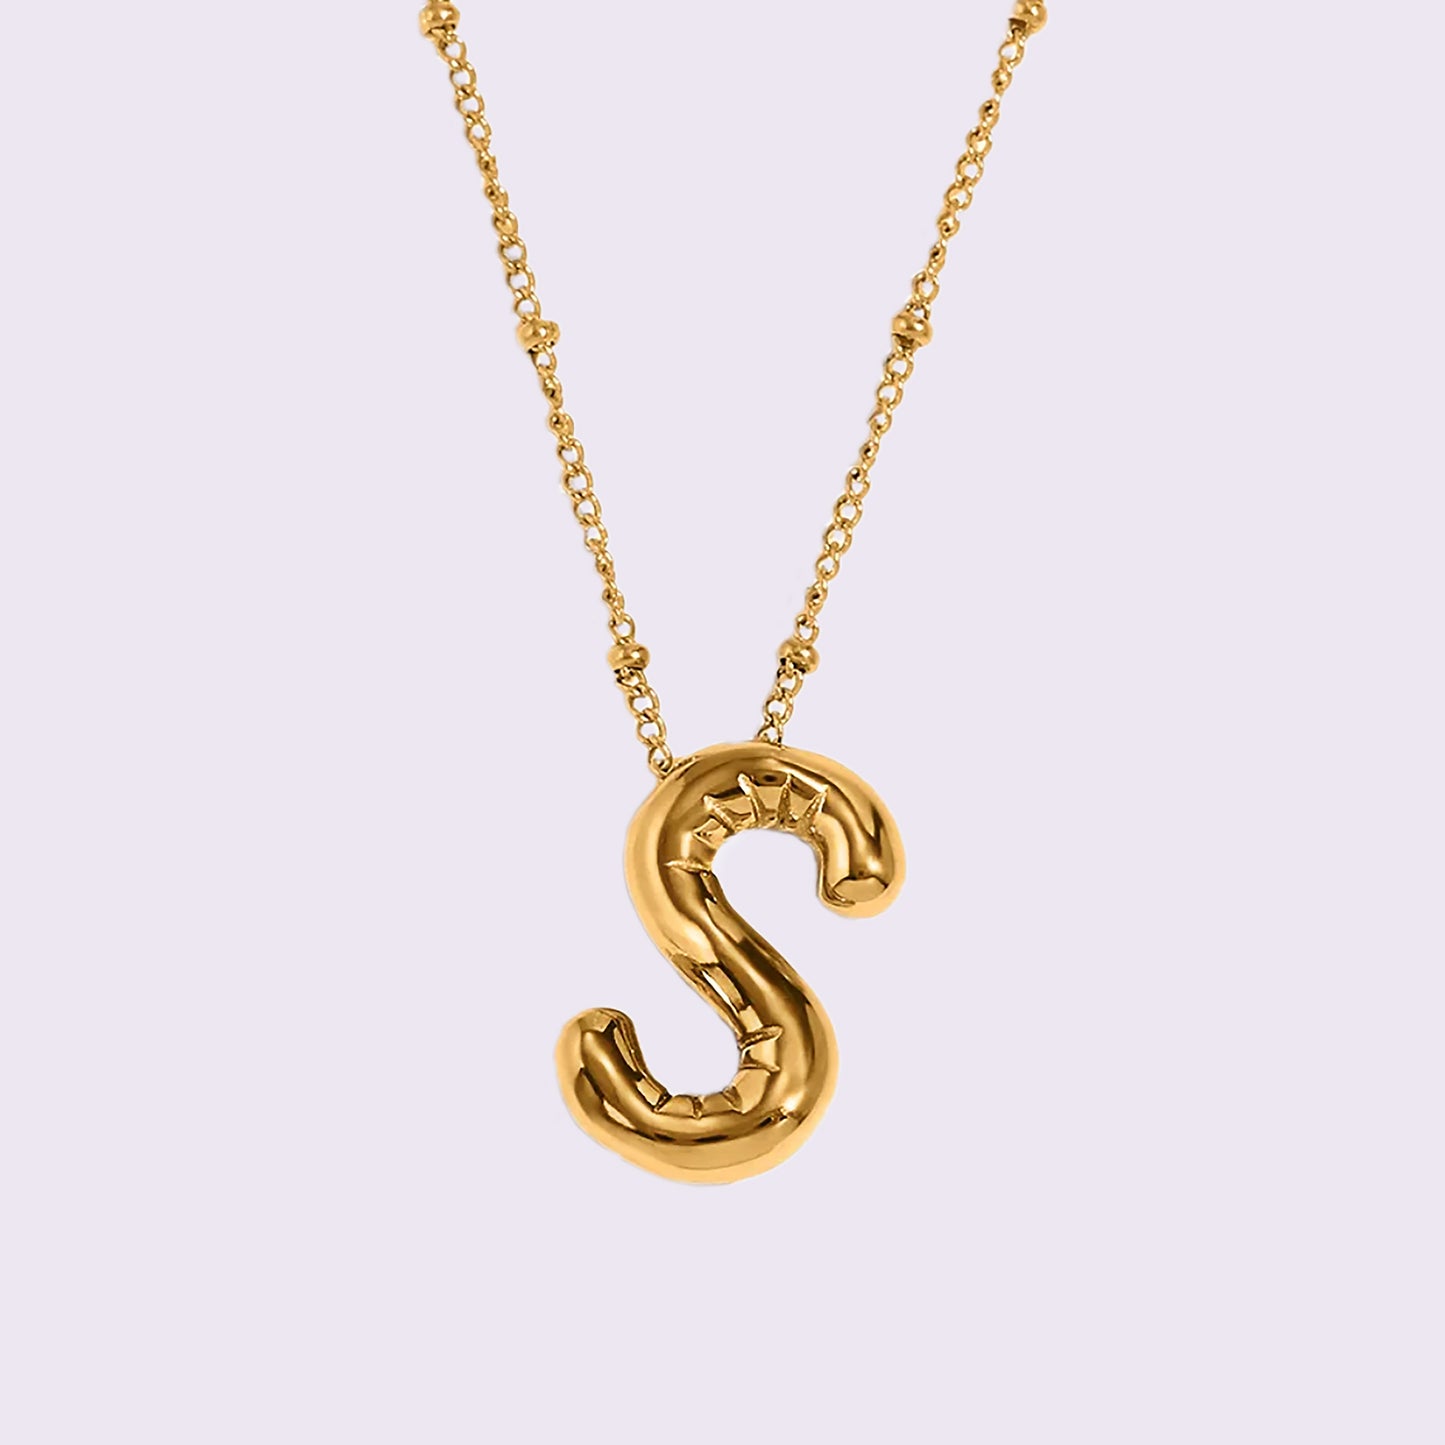 VB 3D Balloon Letter Necklace 18K Gold Plated.